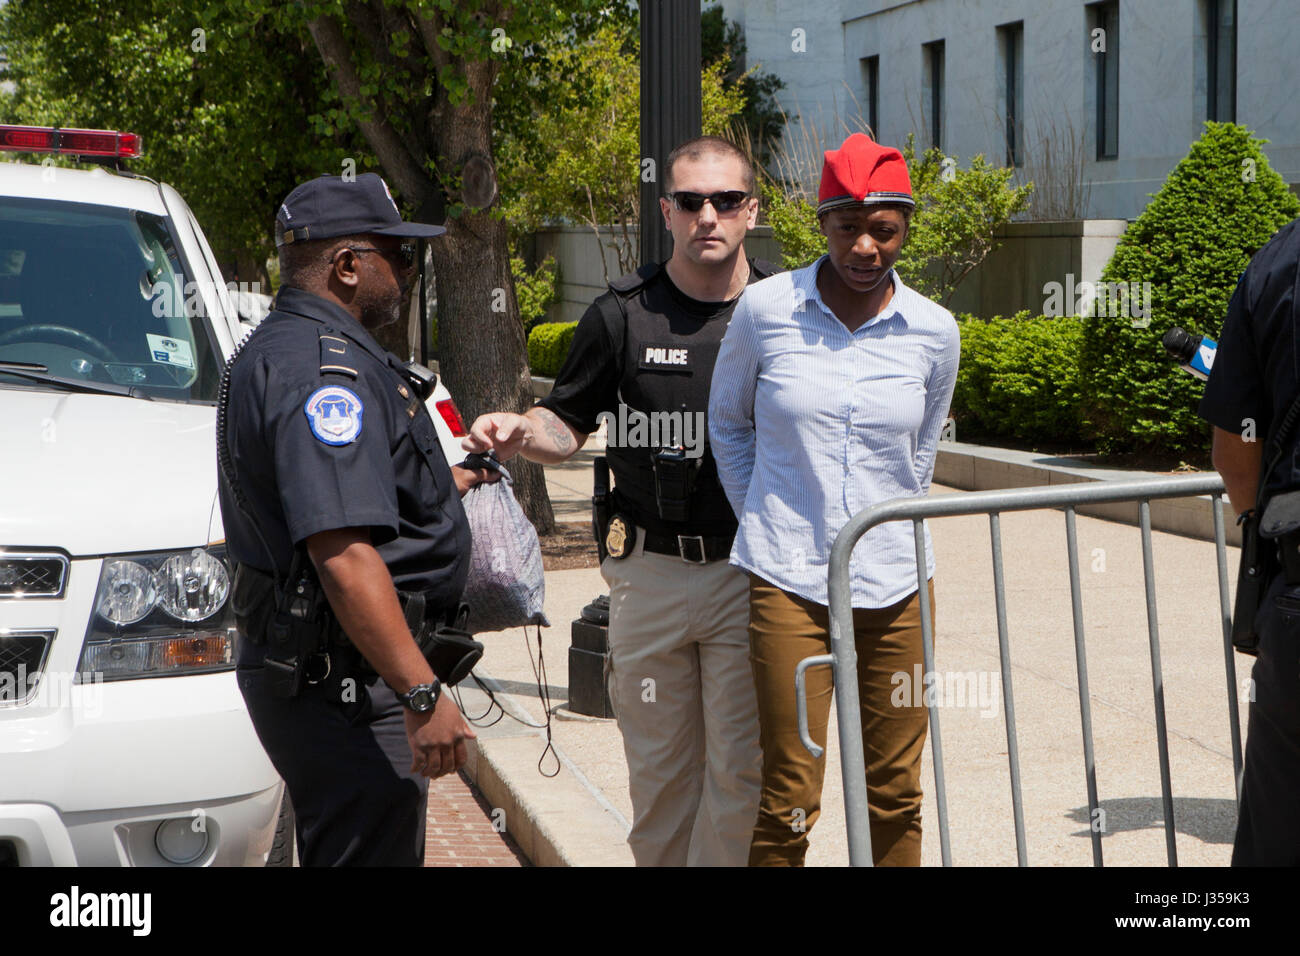 woman-handcuffed-and-arrested-by-us-capitol-police-washington-dc-usa-J359K3.jpg